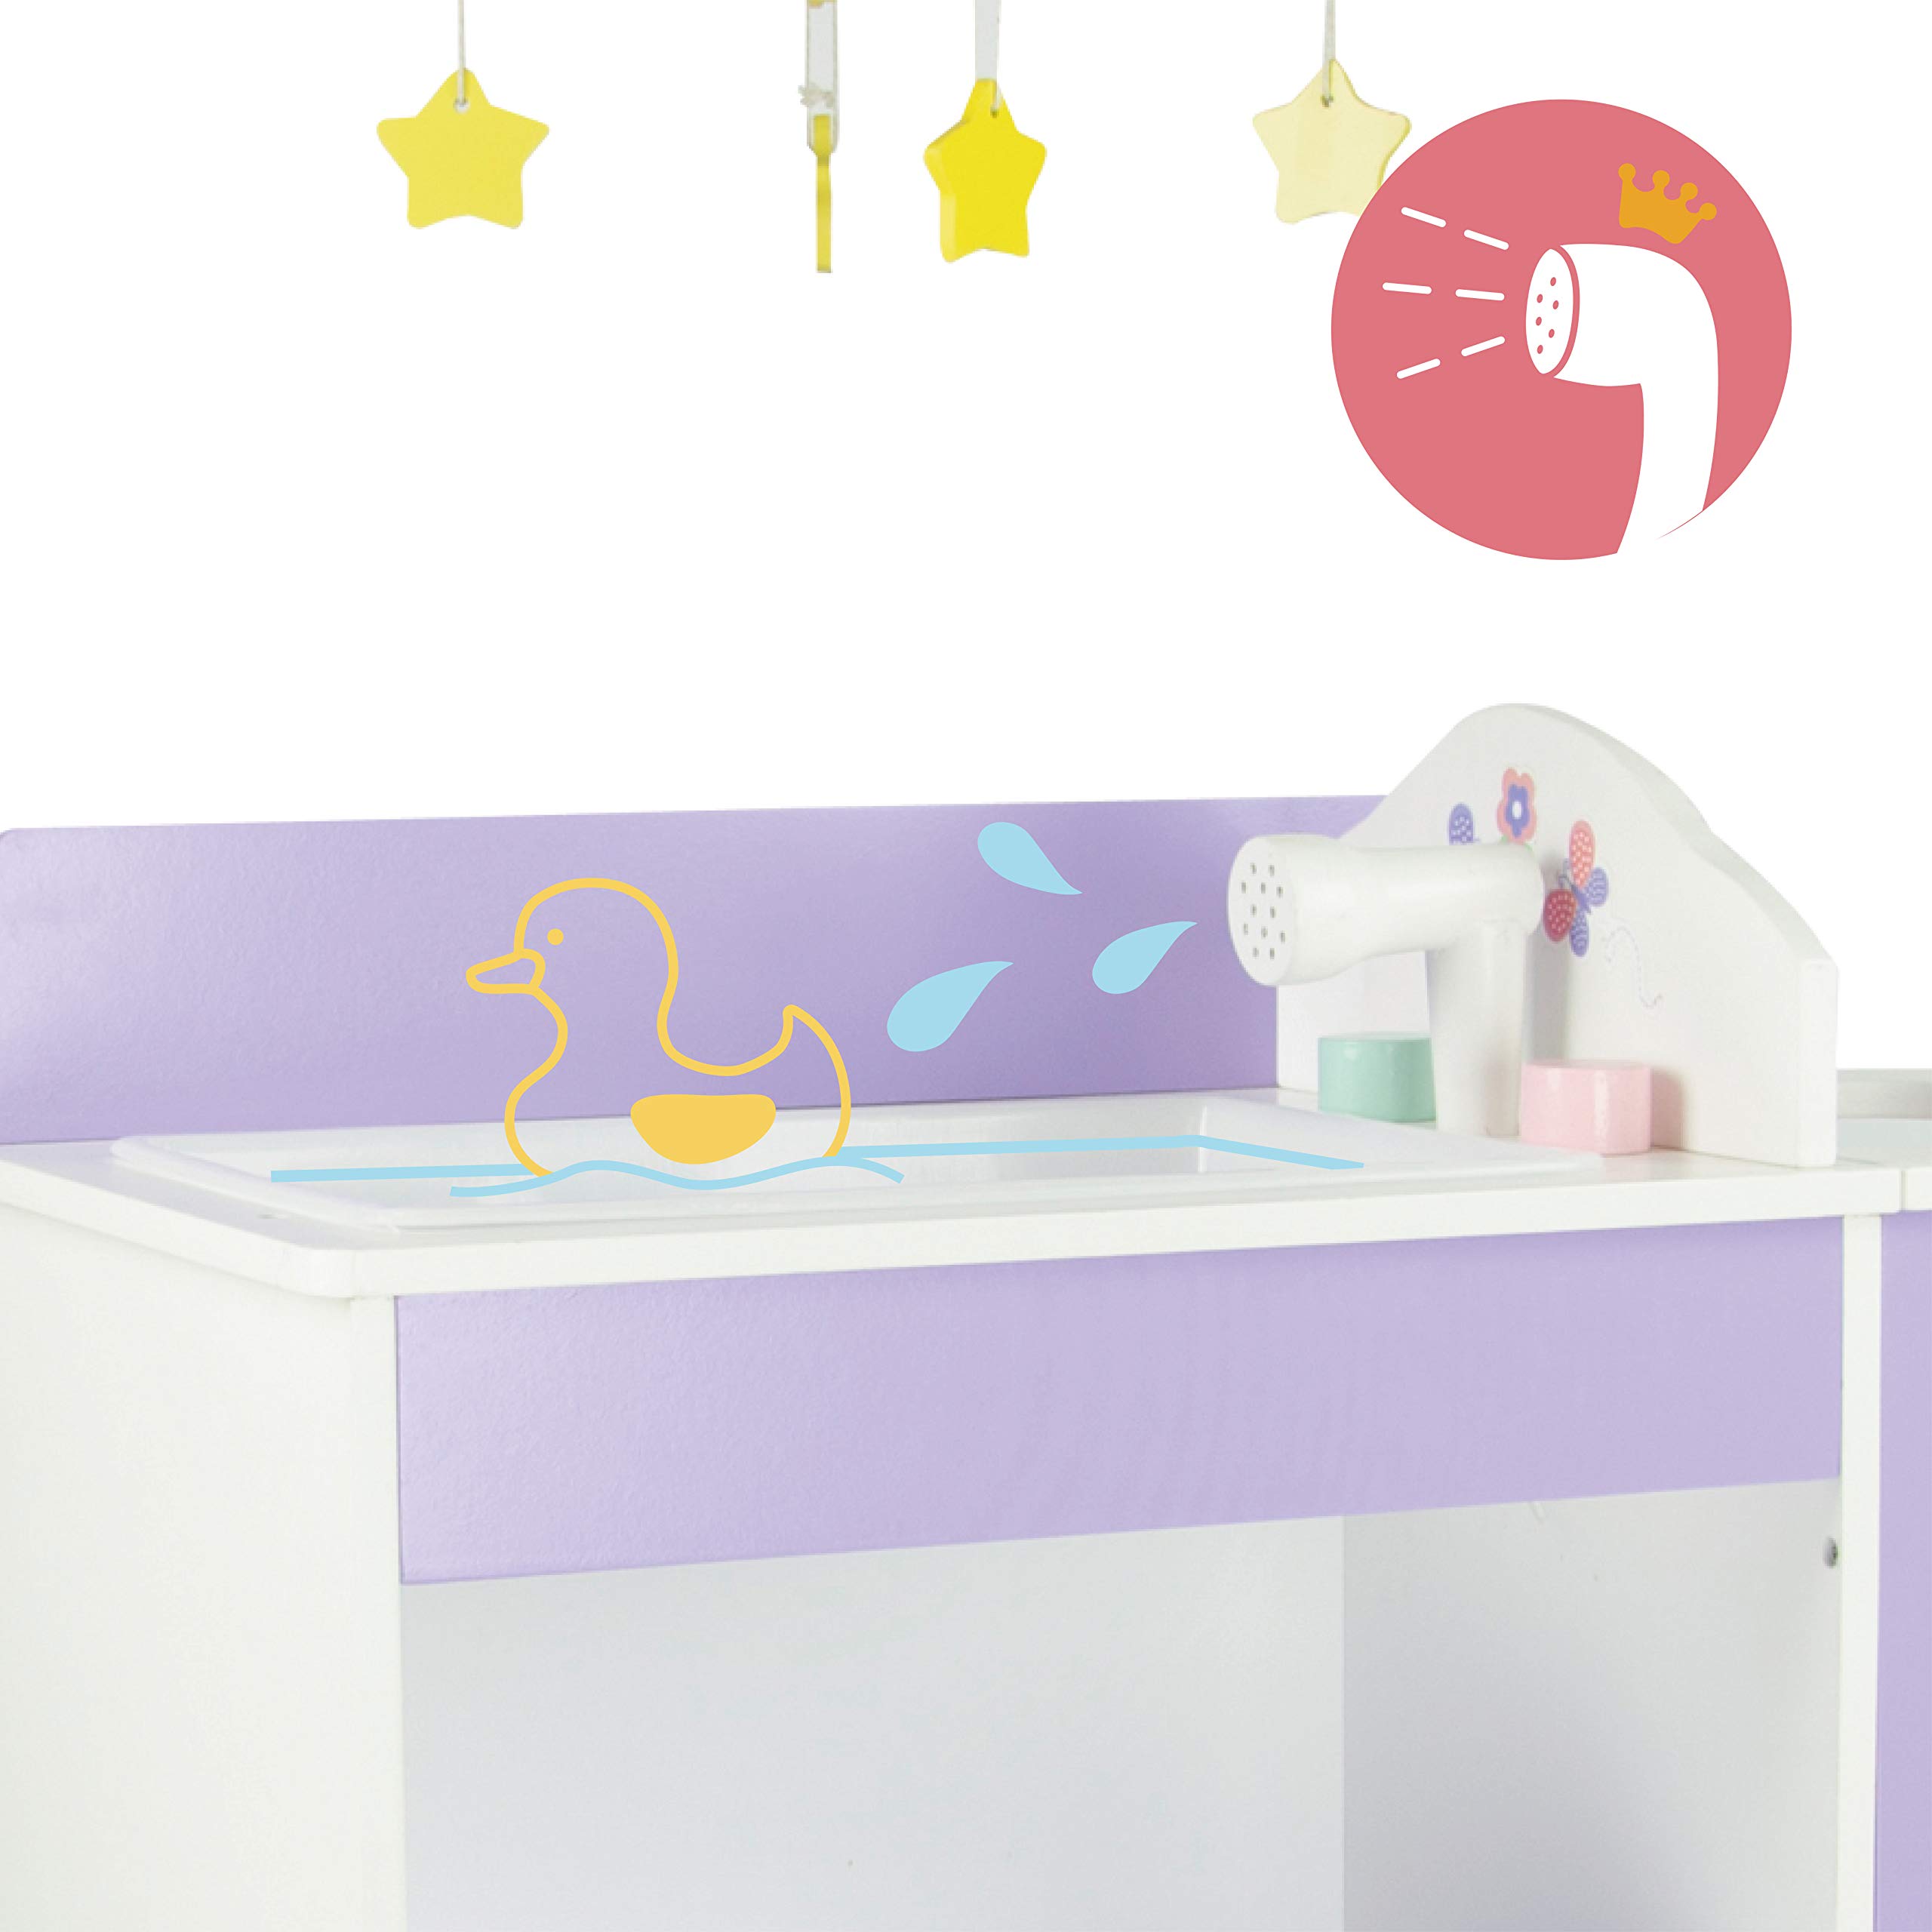 Olivia's Little World Baby Doll Changing Station, Baby Care Activity Center, Role Play Nursery Center with Storage for Dolls High Chair, Accessories for up to 18 Inch Dolls, Pink/Purple/White